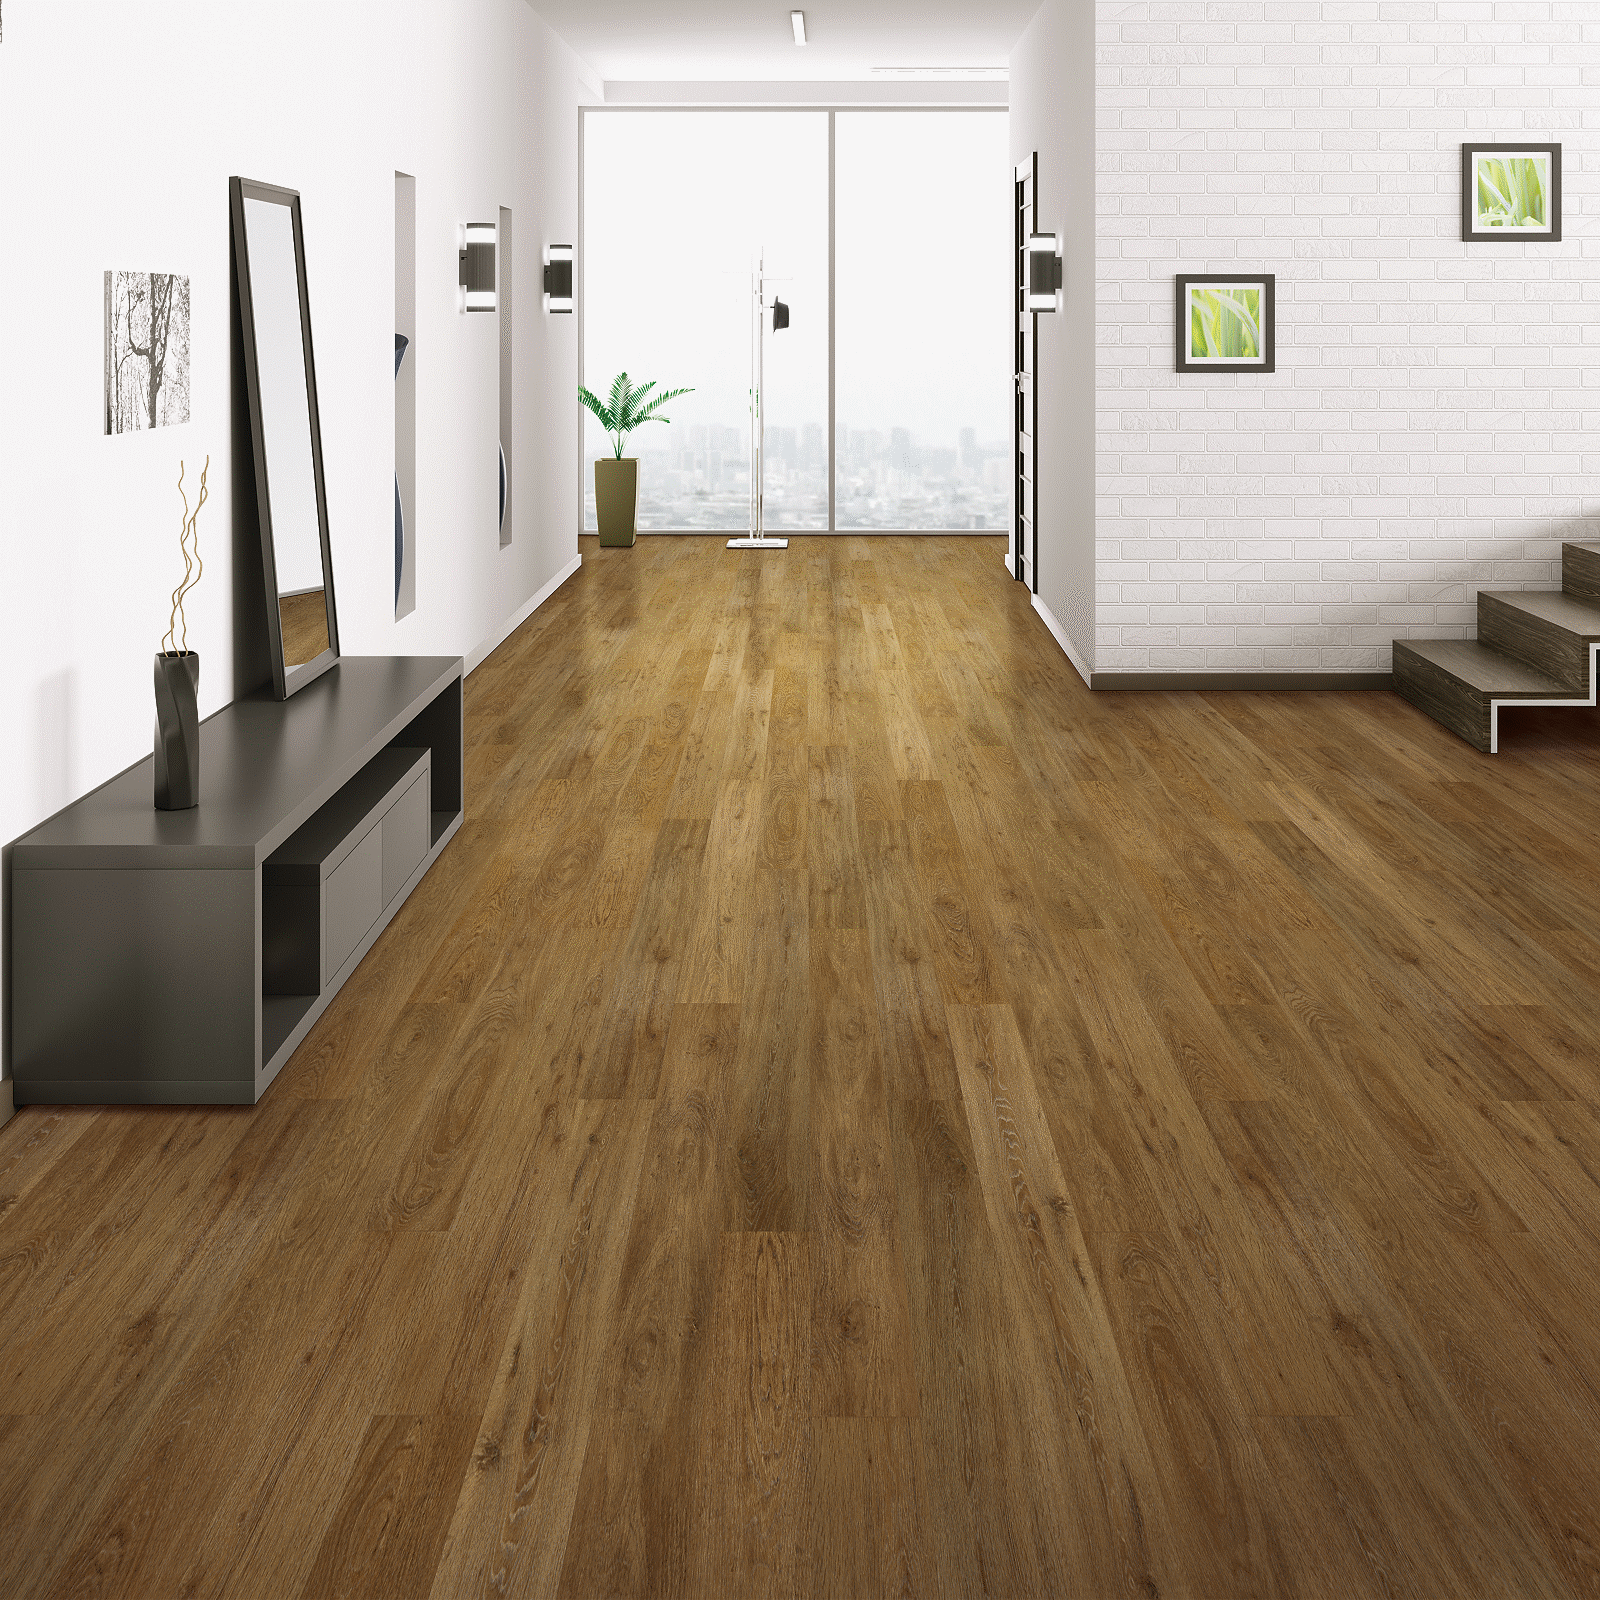 Mohawk SolidTech Select Founders Trace FTS21-841 Pecan Vinyl Plank 7" X 48" (23.86 SF/Box)